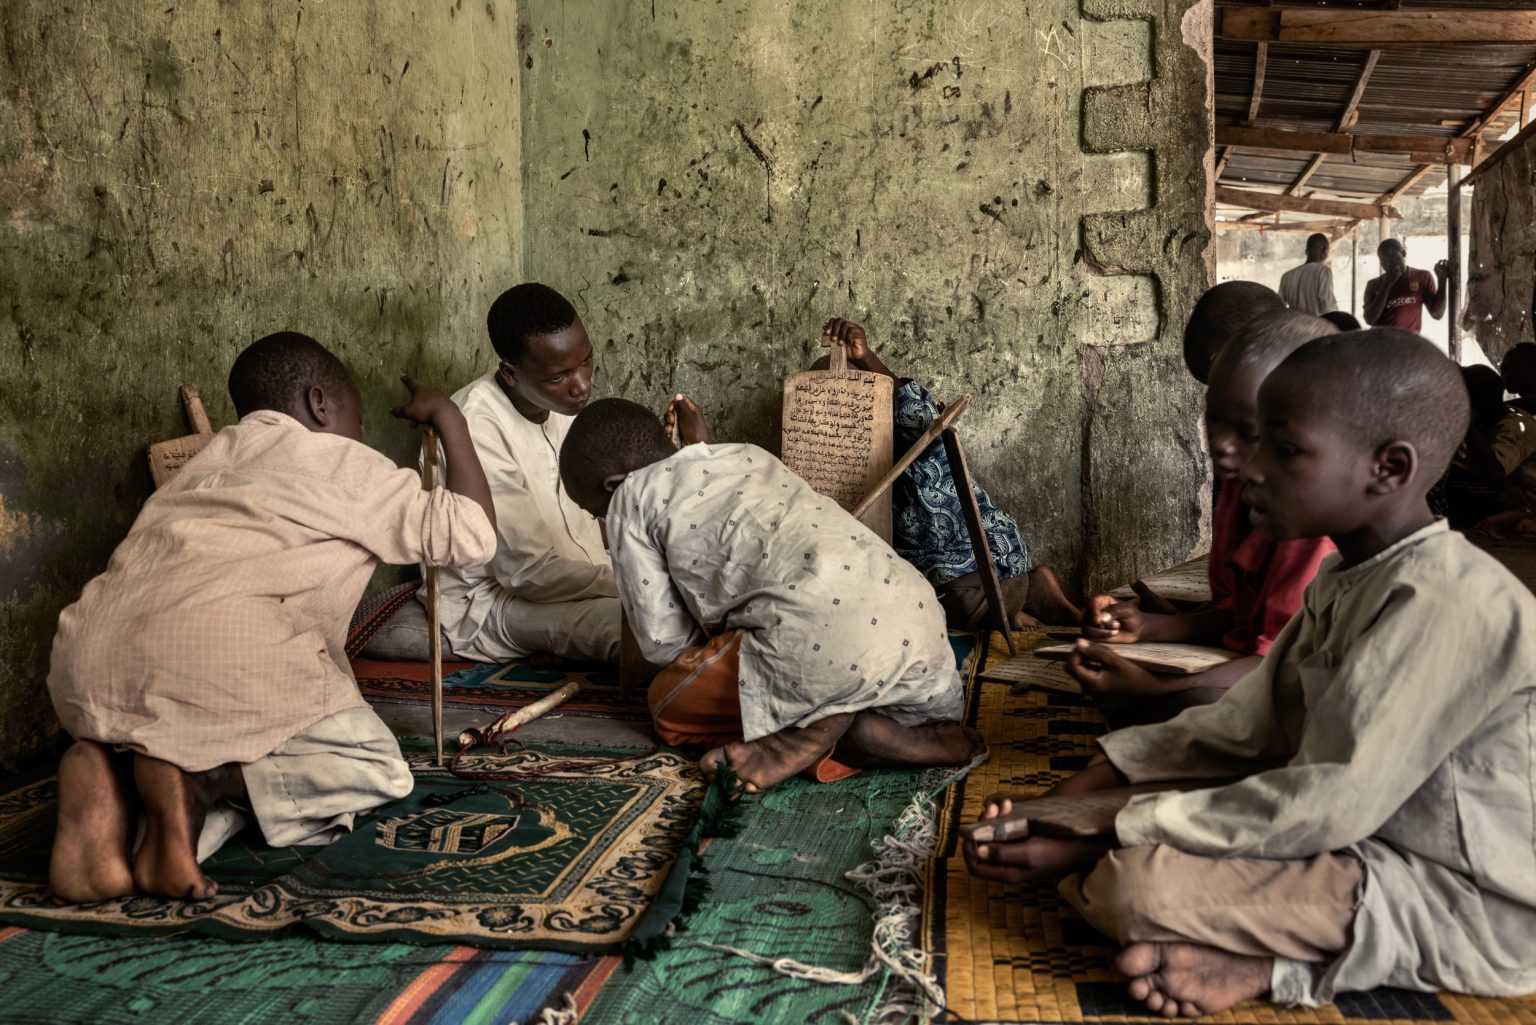 Maiduguri, Nigeria, Africa, May 2021 - Baba Buji Model Sangaya Center, Bolori Ward, is one of the main Madrasa (Koranic schools) in Maiduguri. Almajiranci is a system of islamic education performed in the north of Nigeria. Colloquially, the name in its negative meaning refers to any young person that begs on the streets and doesnt attend laic school, even if in accordance with the Islamic rigour it should be forbidden for the Almajiris to beg. The almajiri system is very controversial in Nigeria, and it has been attacked for promoting child poverty and delinquency. It is estimated that in the north of Nigeria, around 8.5 million of kids attend Koranic schools. Almost 70% of unschooled kids out of the 13 million of Nigeria come from the North. ><
Maiduguri, Nigeria, Africa, maggio 2021 - Baba Buji Model Sangaya Center, Bolori Ward, è una delle principali Madrasa (scuola coranica) di Maiduguri. Almajiranci è un sistema di educazione islamica praticato nel nord della Nigeria. Colloquialmente, il termine nella sua accezione negativa, si riferisce a qualsiasi giovane che mendica per strada e non frequenta la scuola laica, anche se in virtù del rigorismo islamico, agli almajiri è proibito mendicare. Il sistema almajiri in Nigeria è molto controverso, ed è stato attaccato per aver promosso la povertà e la delinquenza giovanile. Si conta che in nel nord della Nigeria, circa 8,5 milioni di ragazzi frequentino le scuole coraniche. Circa il 70% di bambini non scolarizzati dei 13 milioni della Nigeria, provengono dal Nord.